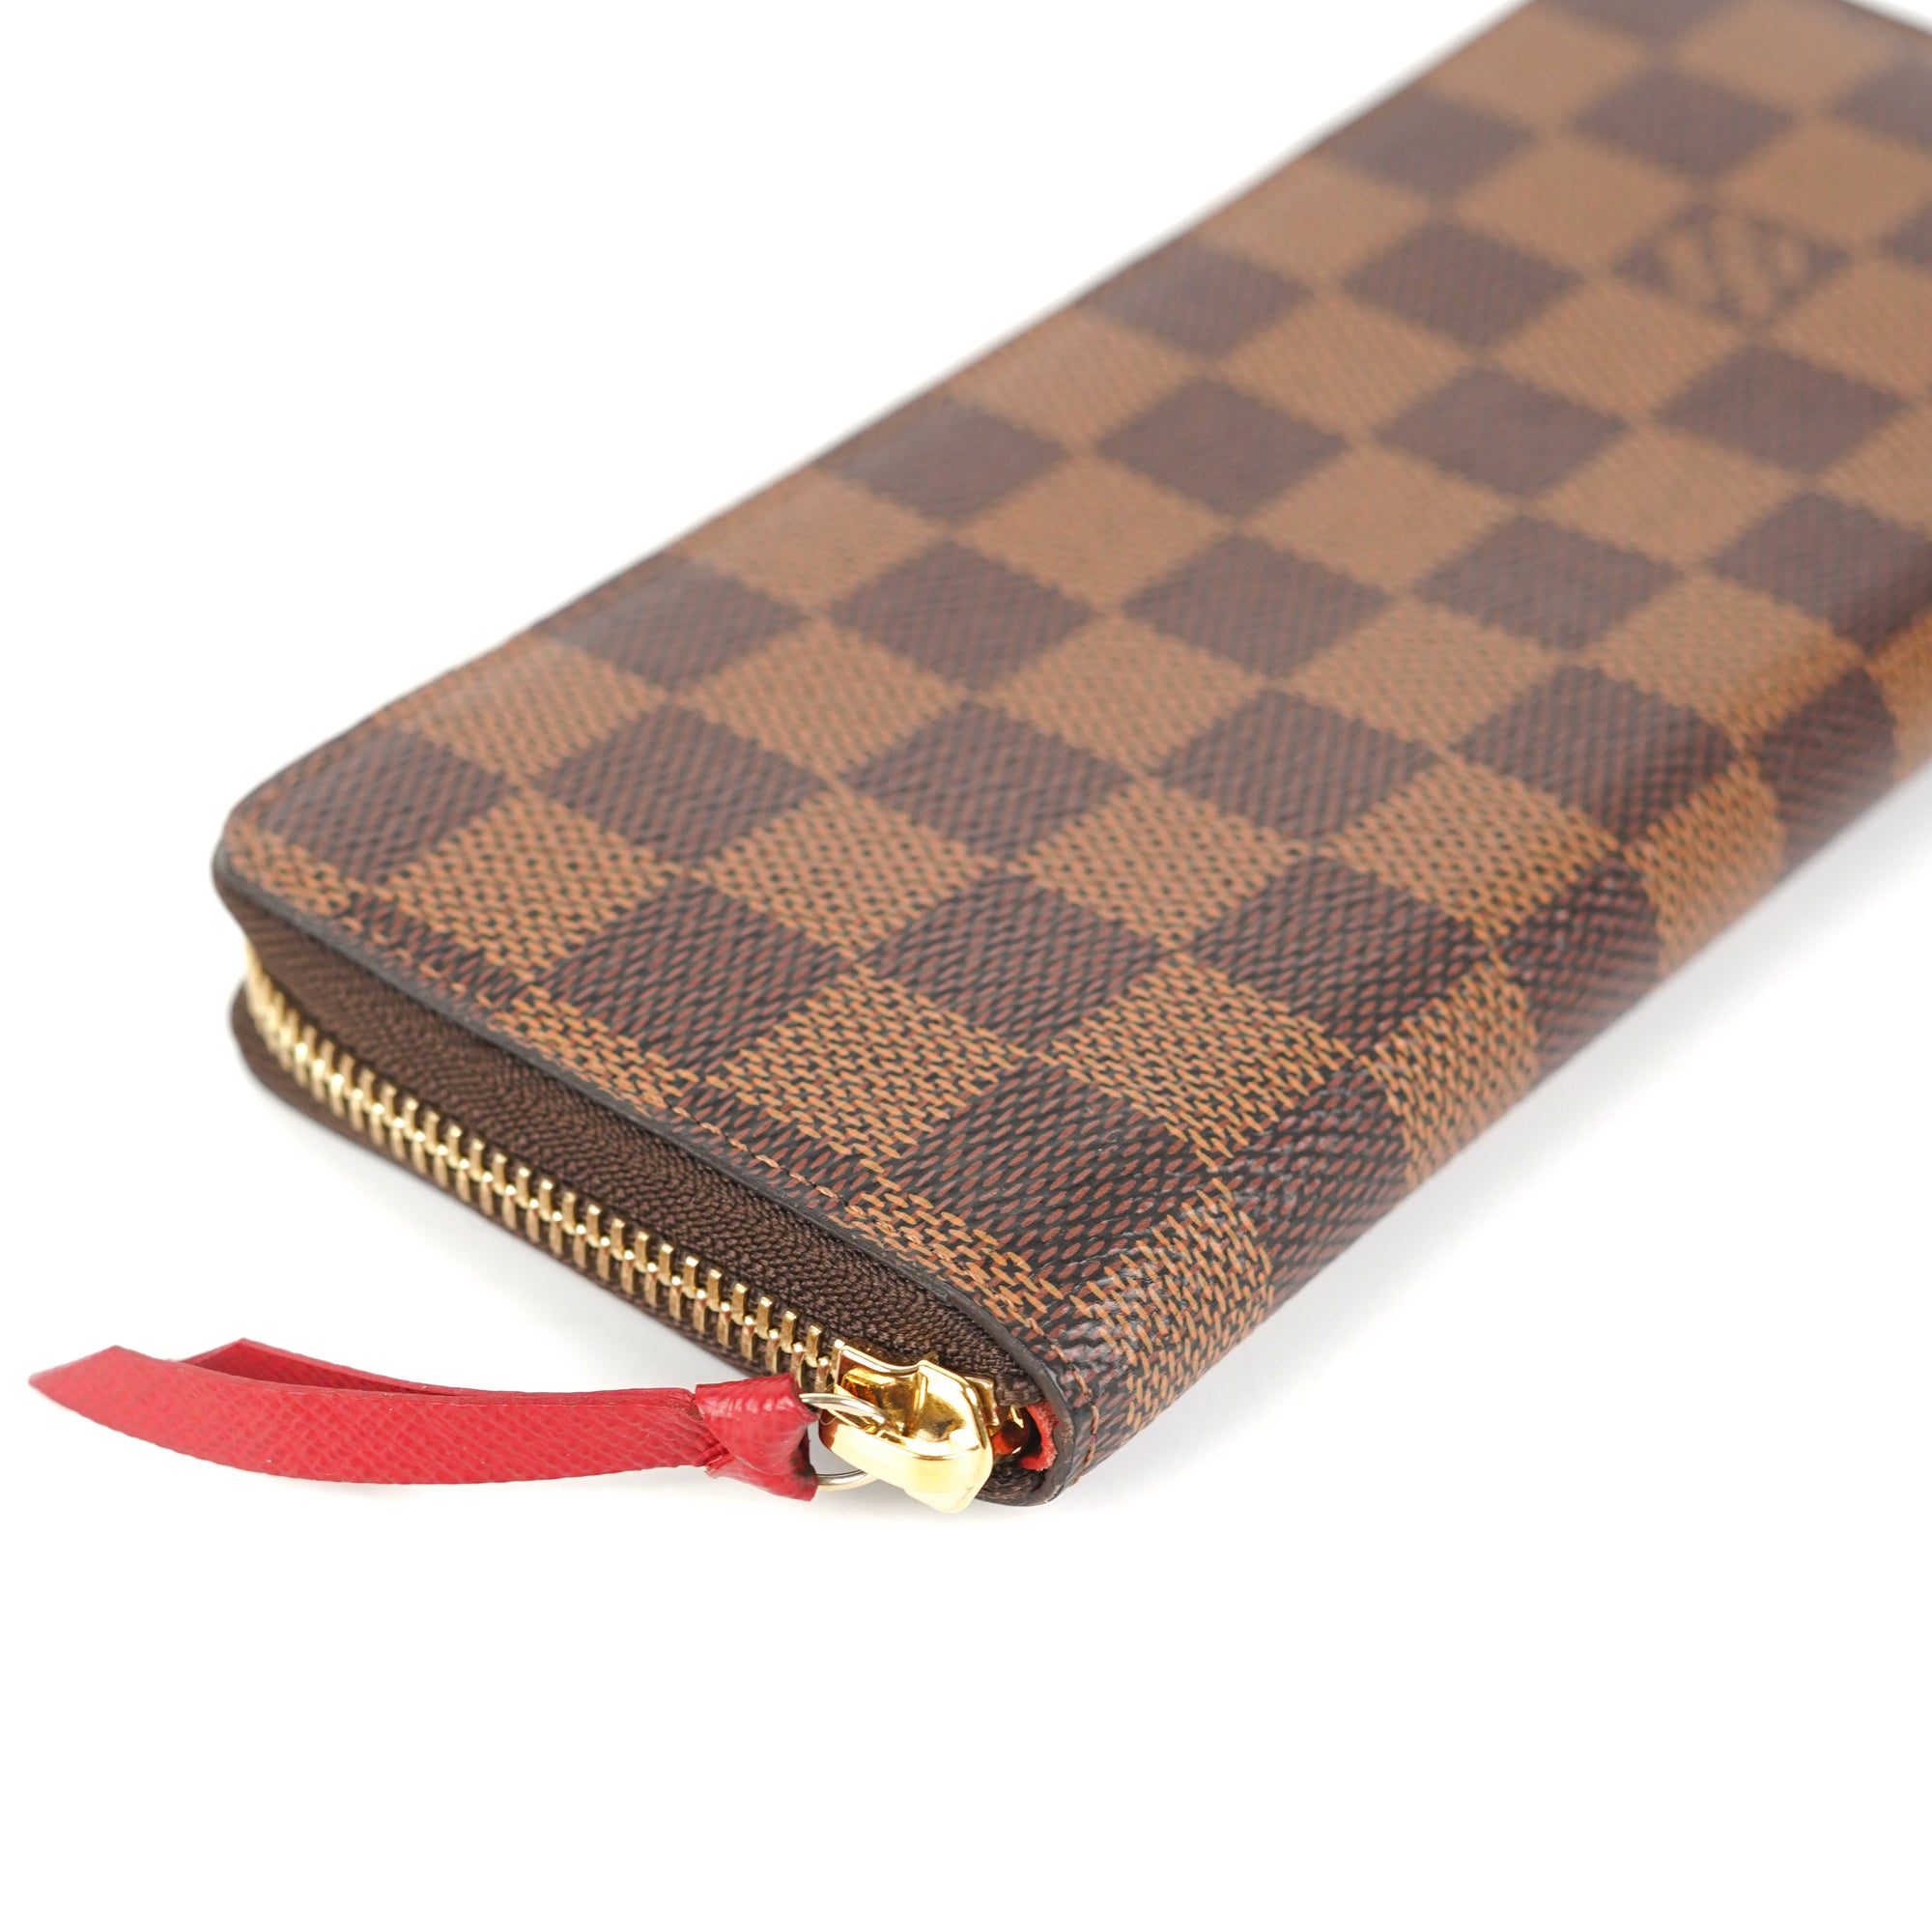 Louis Vuitton Damier Azur Tahitienne Clemence Wallet W/ Dust Cover And Box.